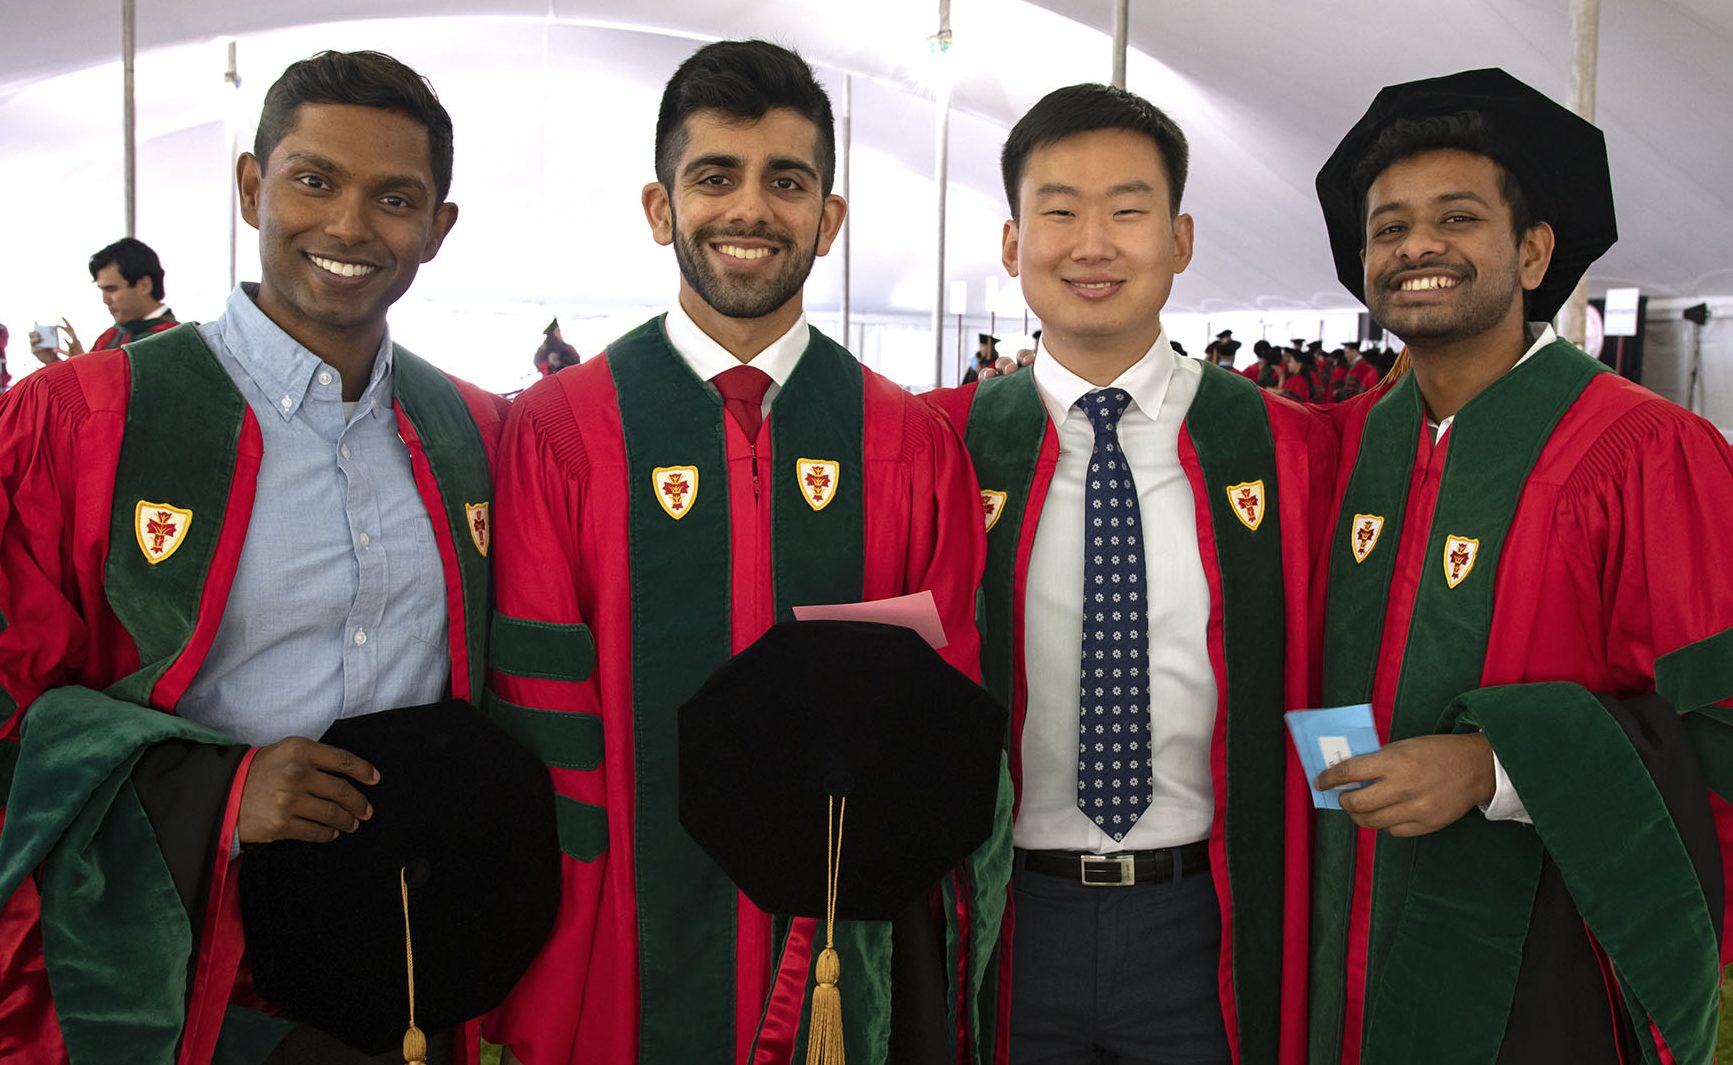 Four MD students before convocation ceremony in tent